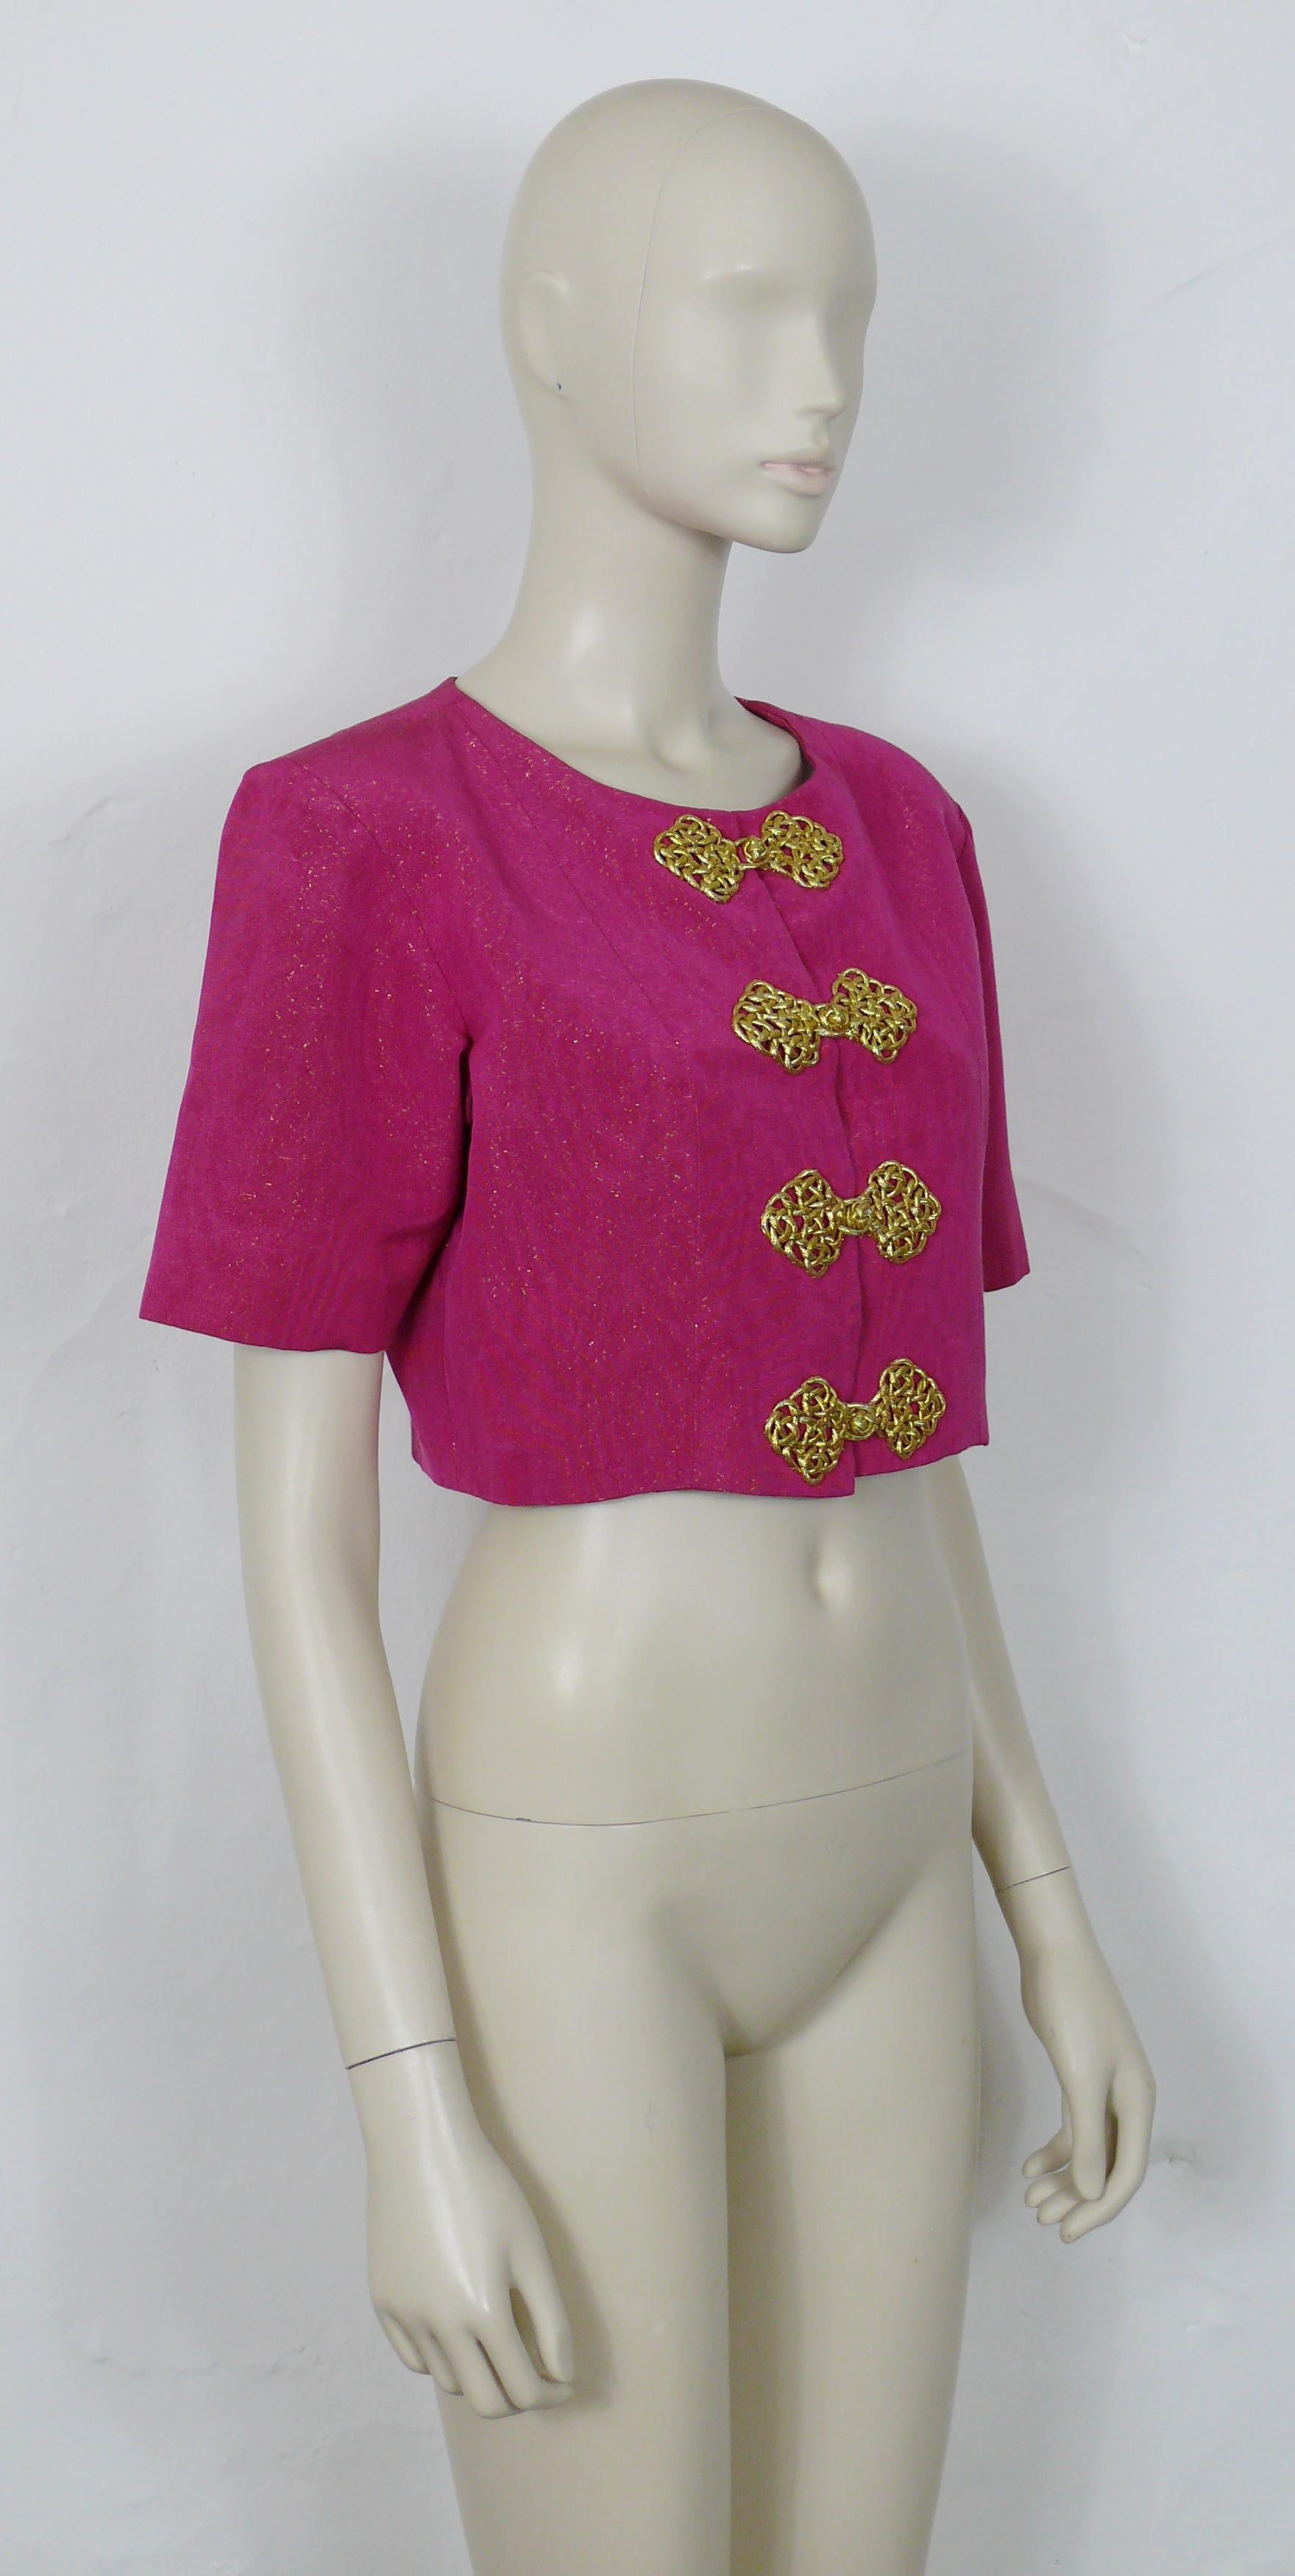 YVES SAINT LAURENT vintage cropped evening supple jacket from the Spring/Summer Ready-to-Wear 1993 Collection.

Similar jacket worn on the runway by NADEGE DUBOSPERTUS.

This JACKET features :
- Cropped length.
- Metal fuschia fabric.
- Elaborated